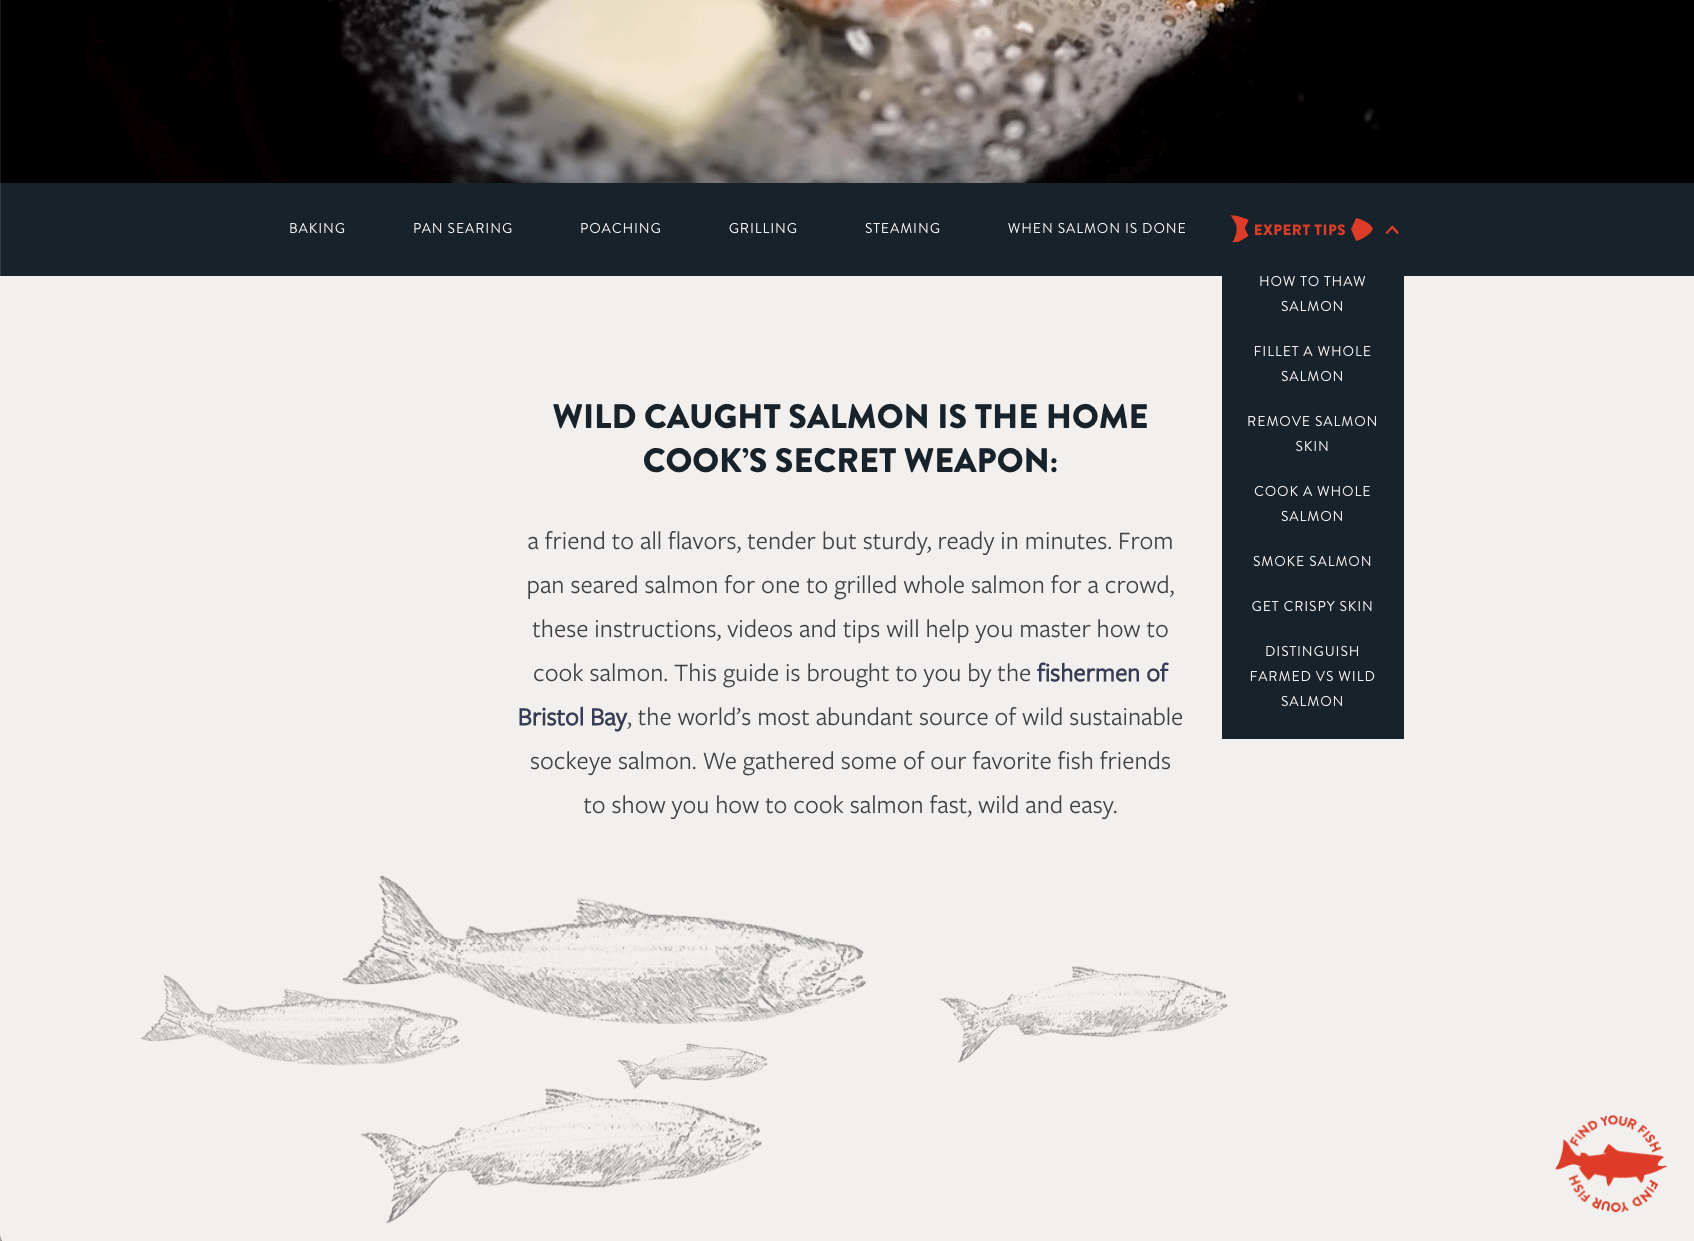 Bristol Bay Sockeye Salmon cooking guide web design showing illustrated fish swimming across page